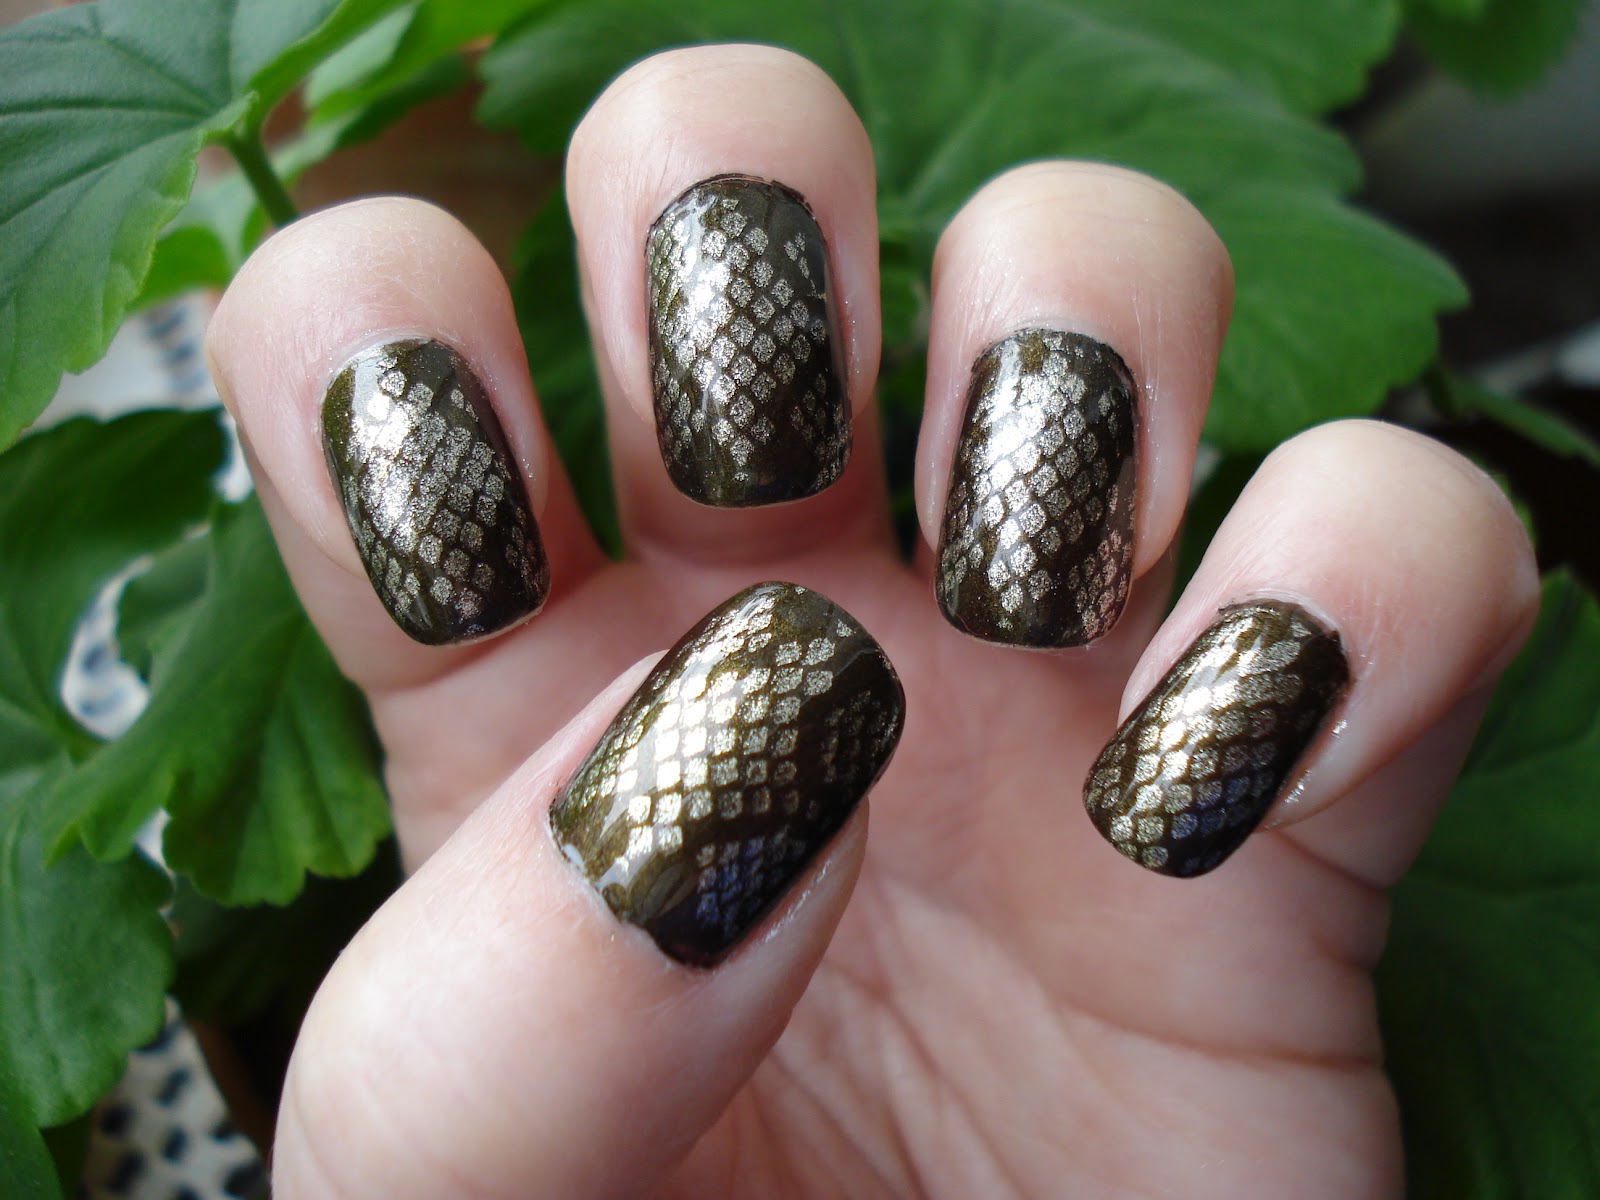 7. Black and White Snake Nails - wide 3